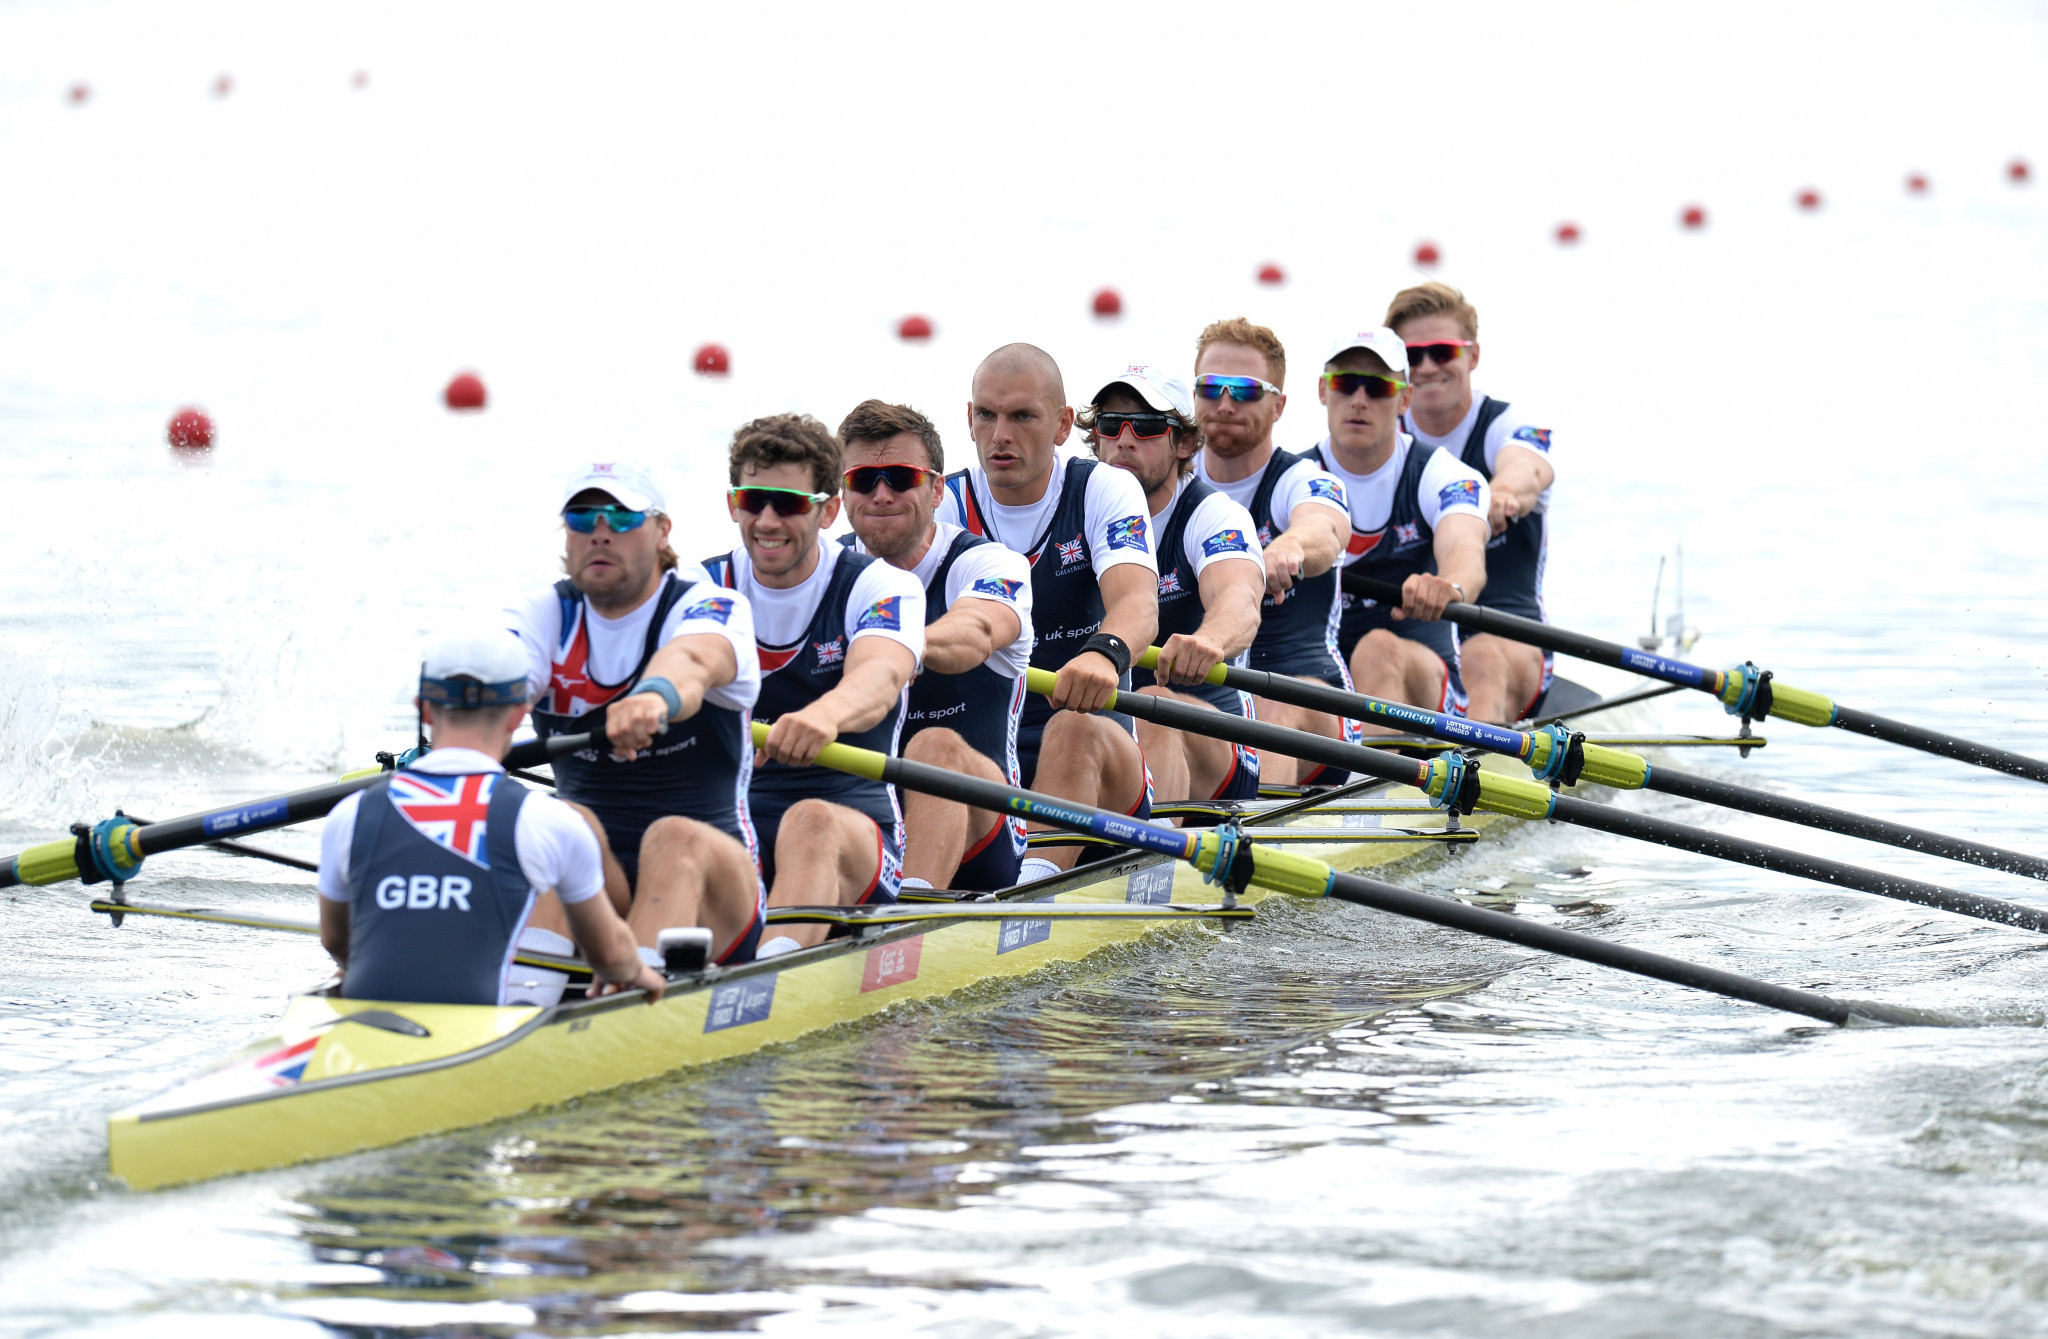 Britain's men's eight crew advanced to the final from the repechage ©Getty Images